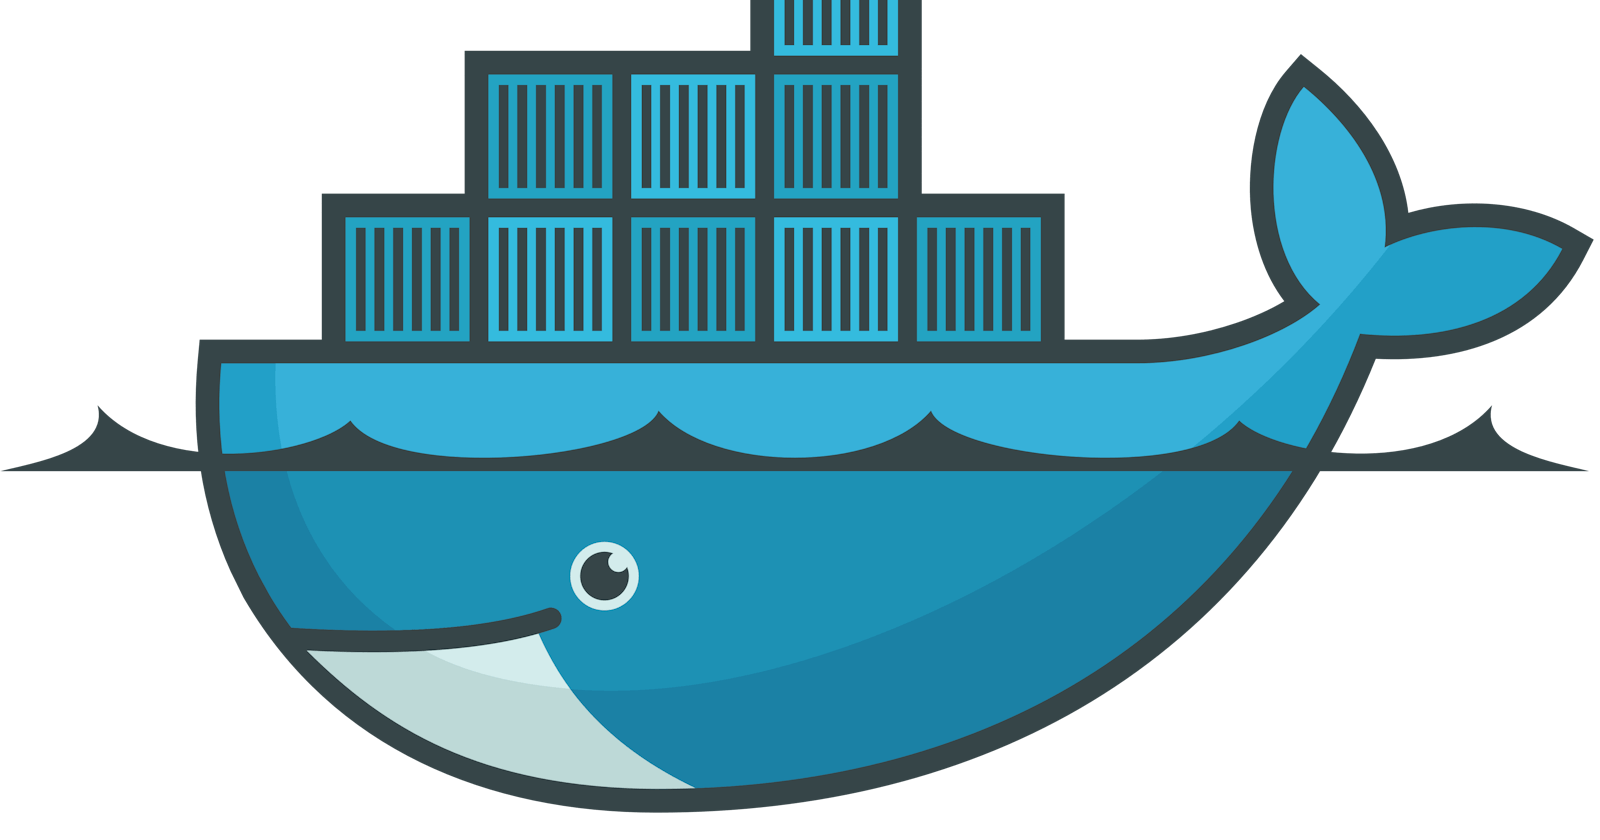 How to use the latest docker scan?